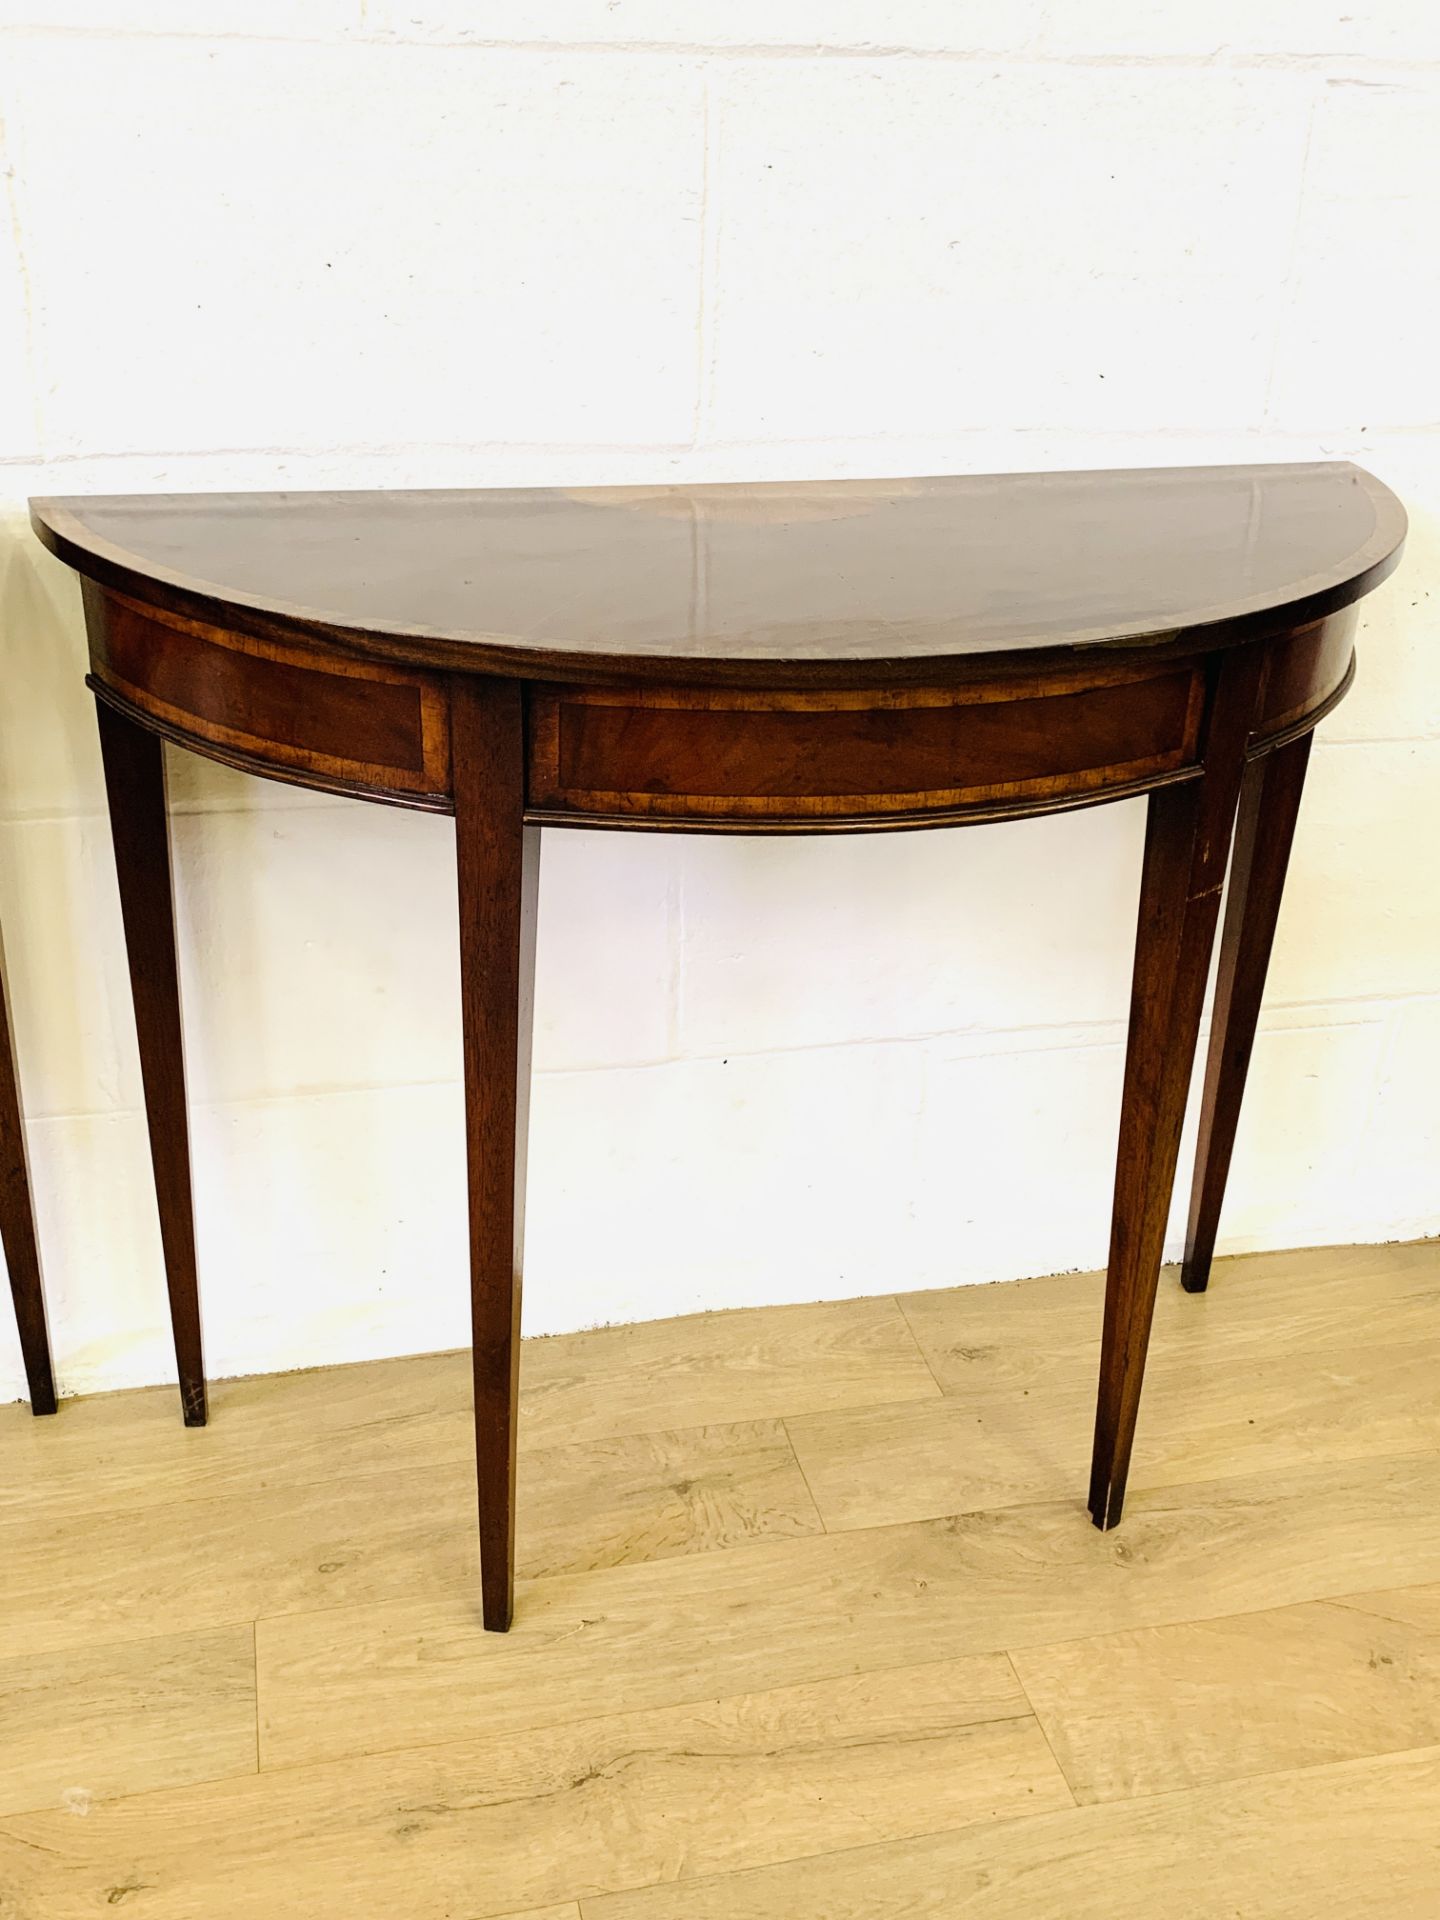 Mahogany demi-lune tables - Image 6 of 6